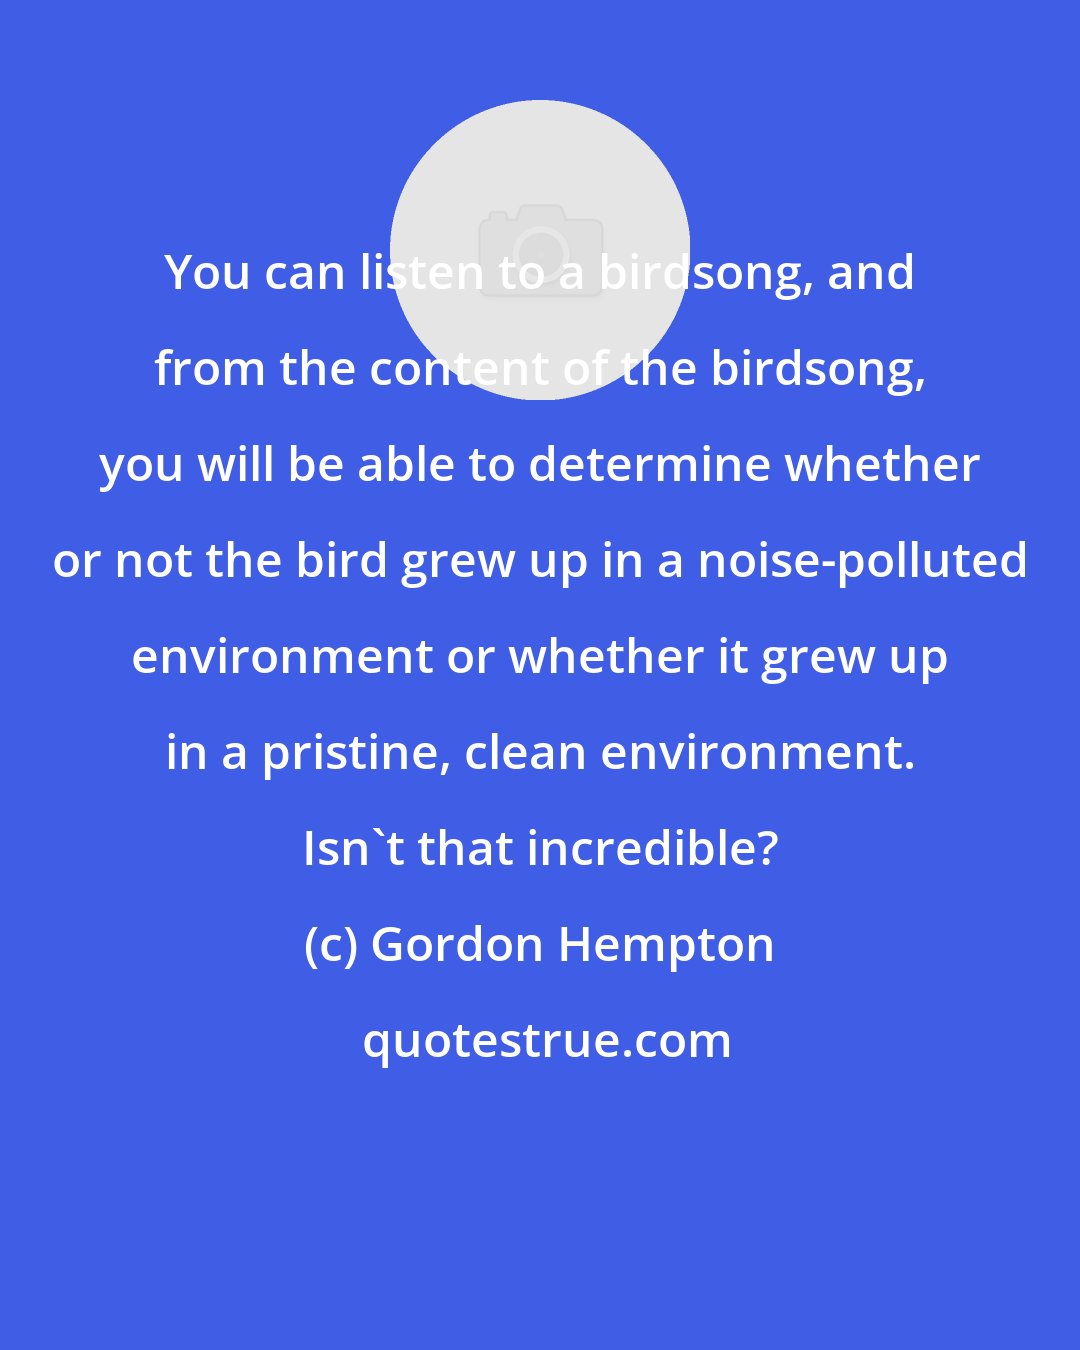 Gordon Hempton: You can listen to a birdsong, and from the content of the birdsong, you will be able to determine whether or not the bird grew up in a noise-polluted environment or whether it grew up in a pristine, clean environment. Isn't that incredible?